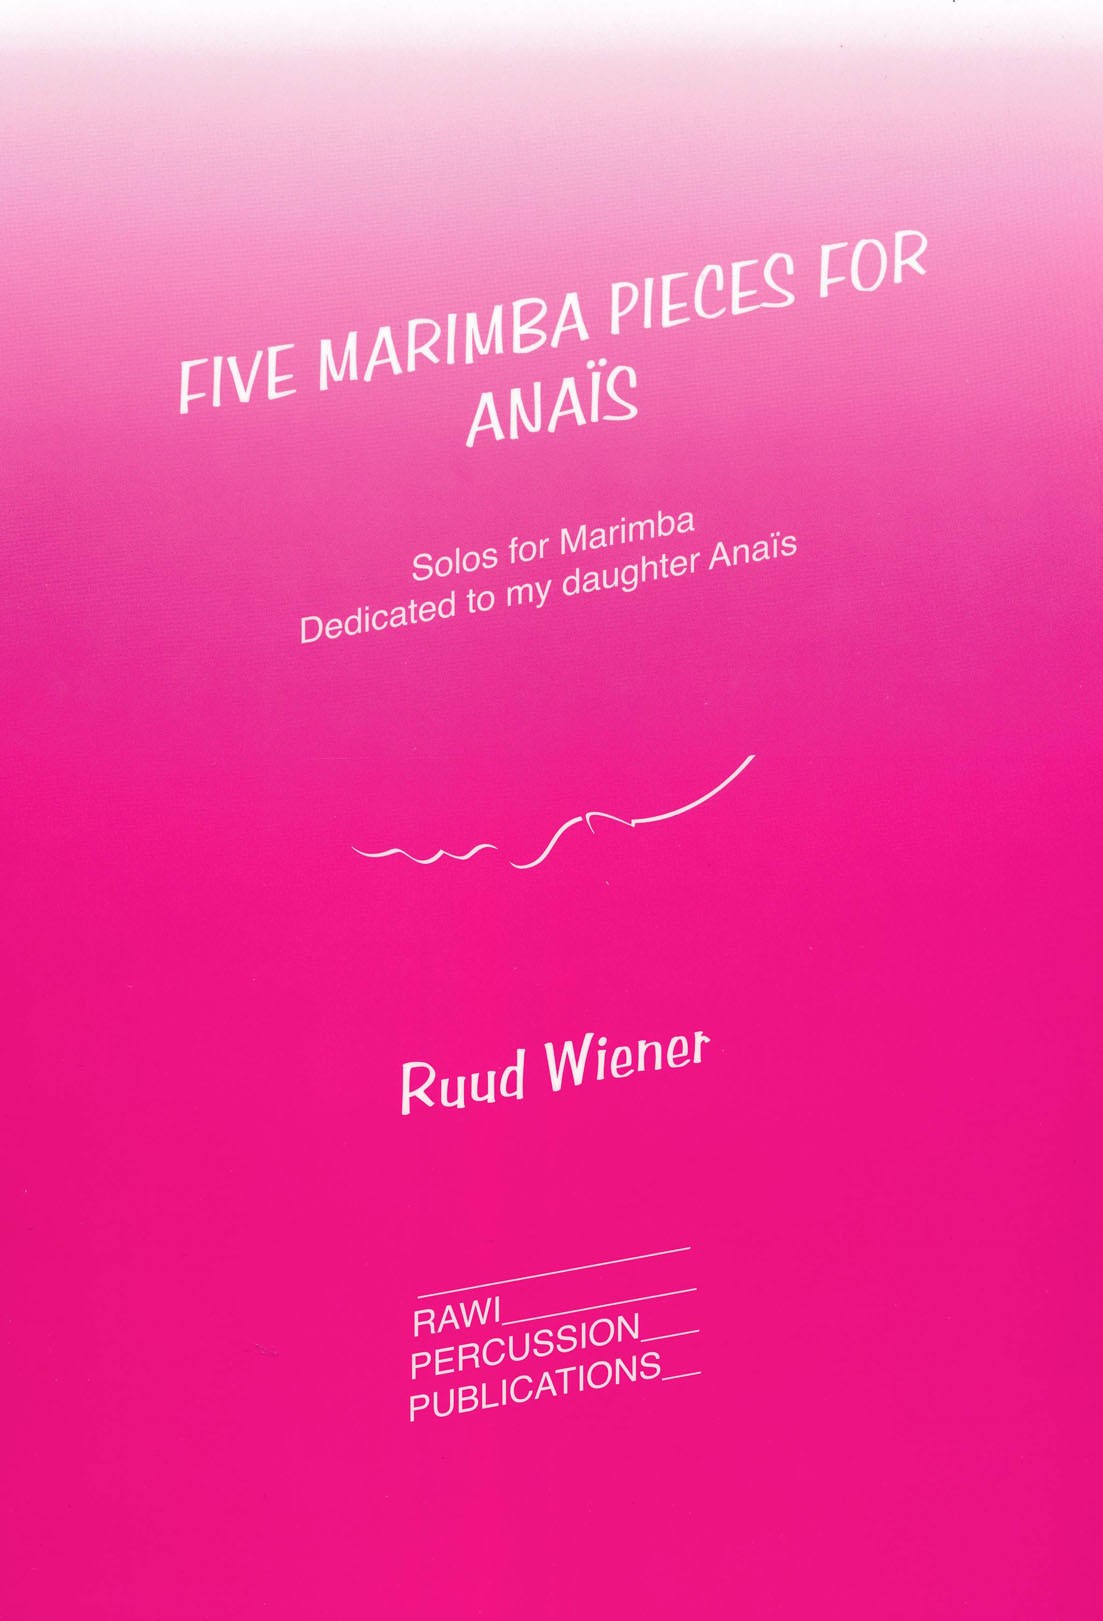 Five Marimba Pieces for Anais by Ruud Wiener